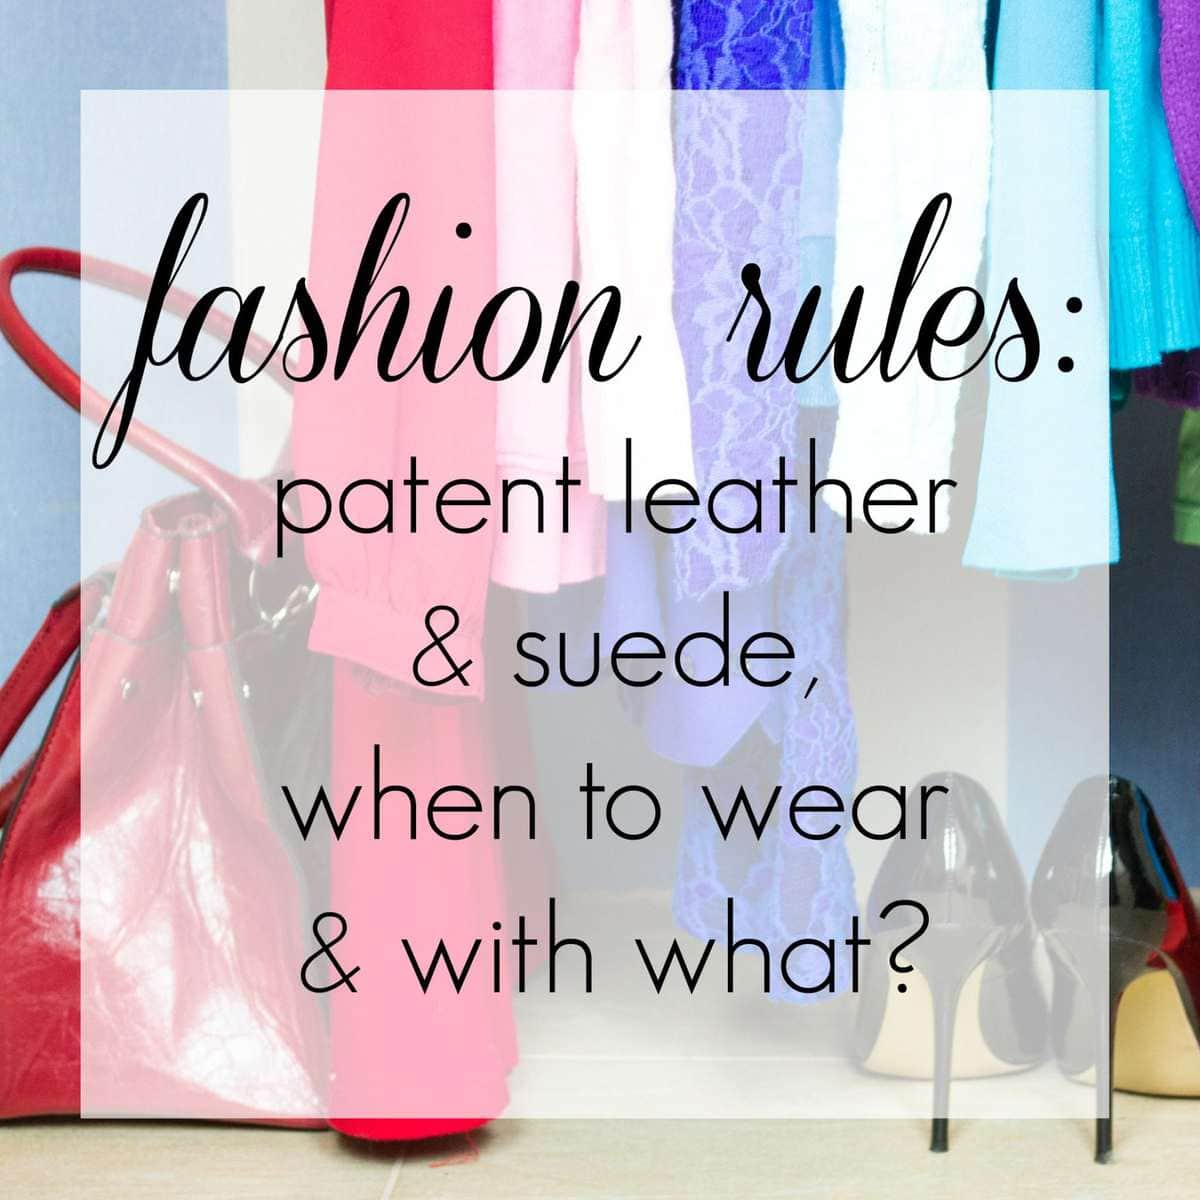 Breaking Fashion Rules: Patent Leather and Suede